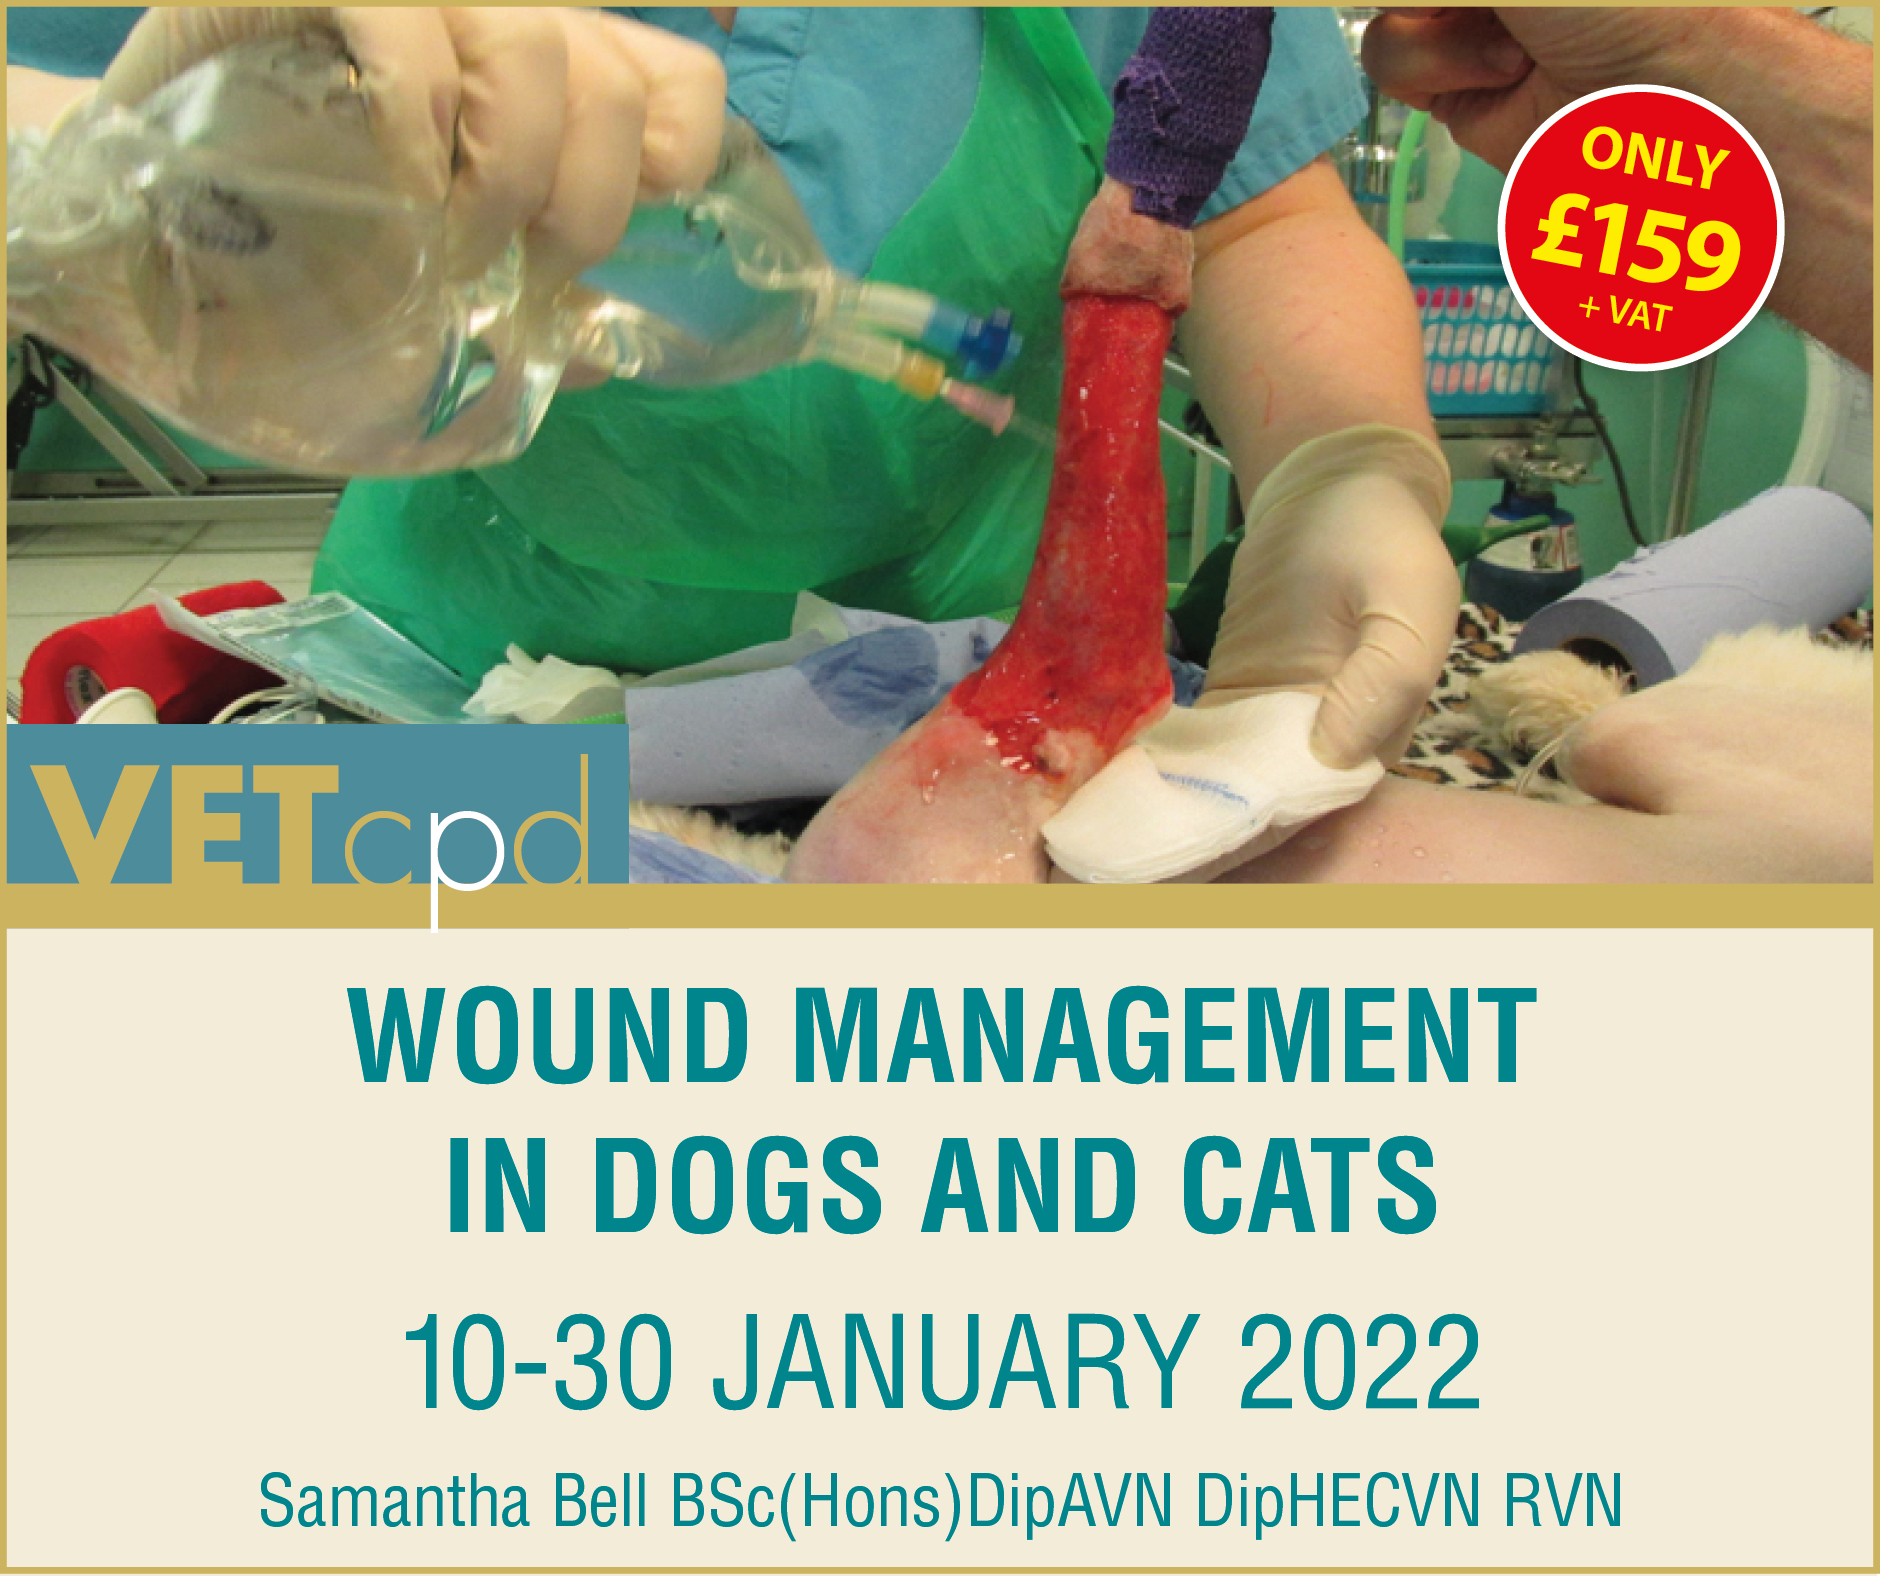 Wound Management January 2022 FB